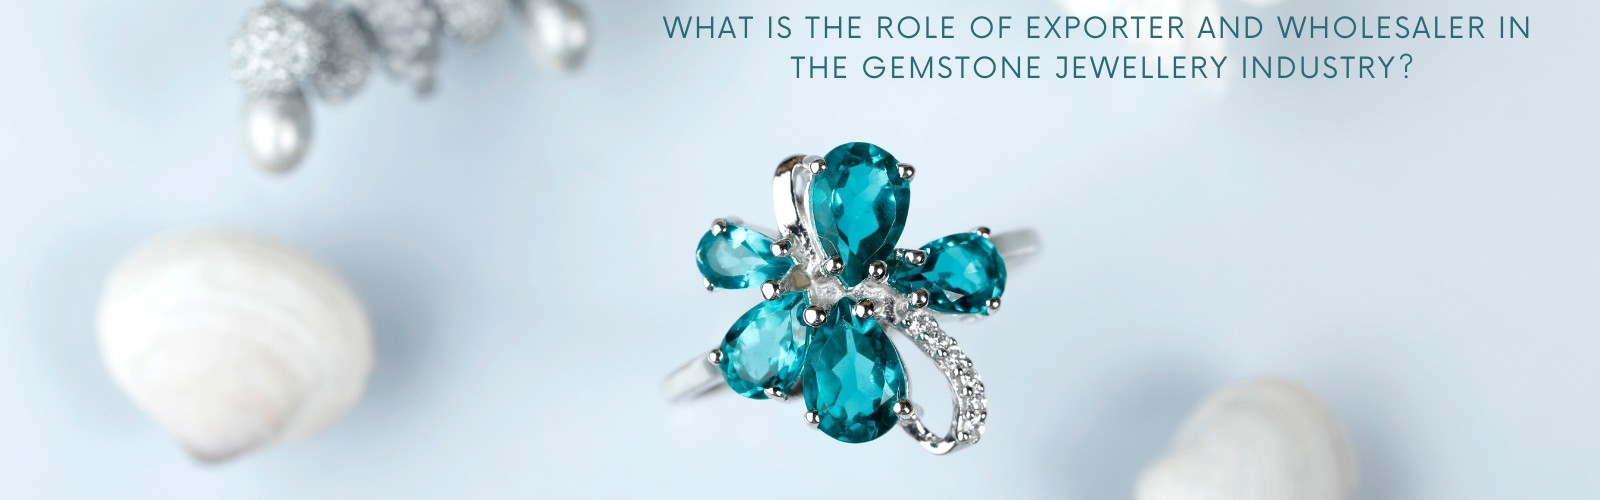 what role do exporters and wholesalers play in the gemstone jewellery industry